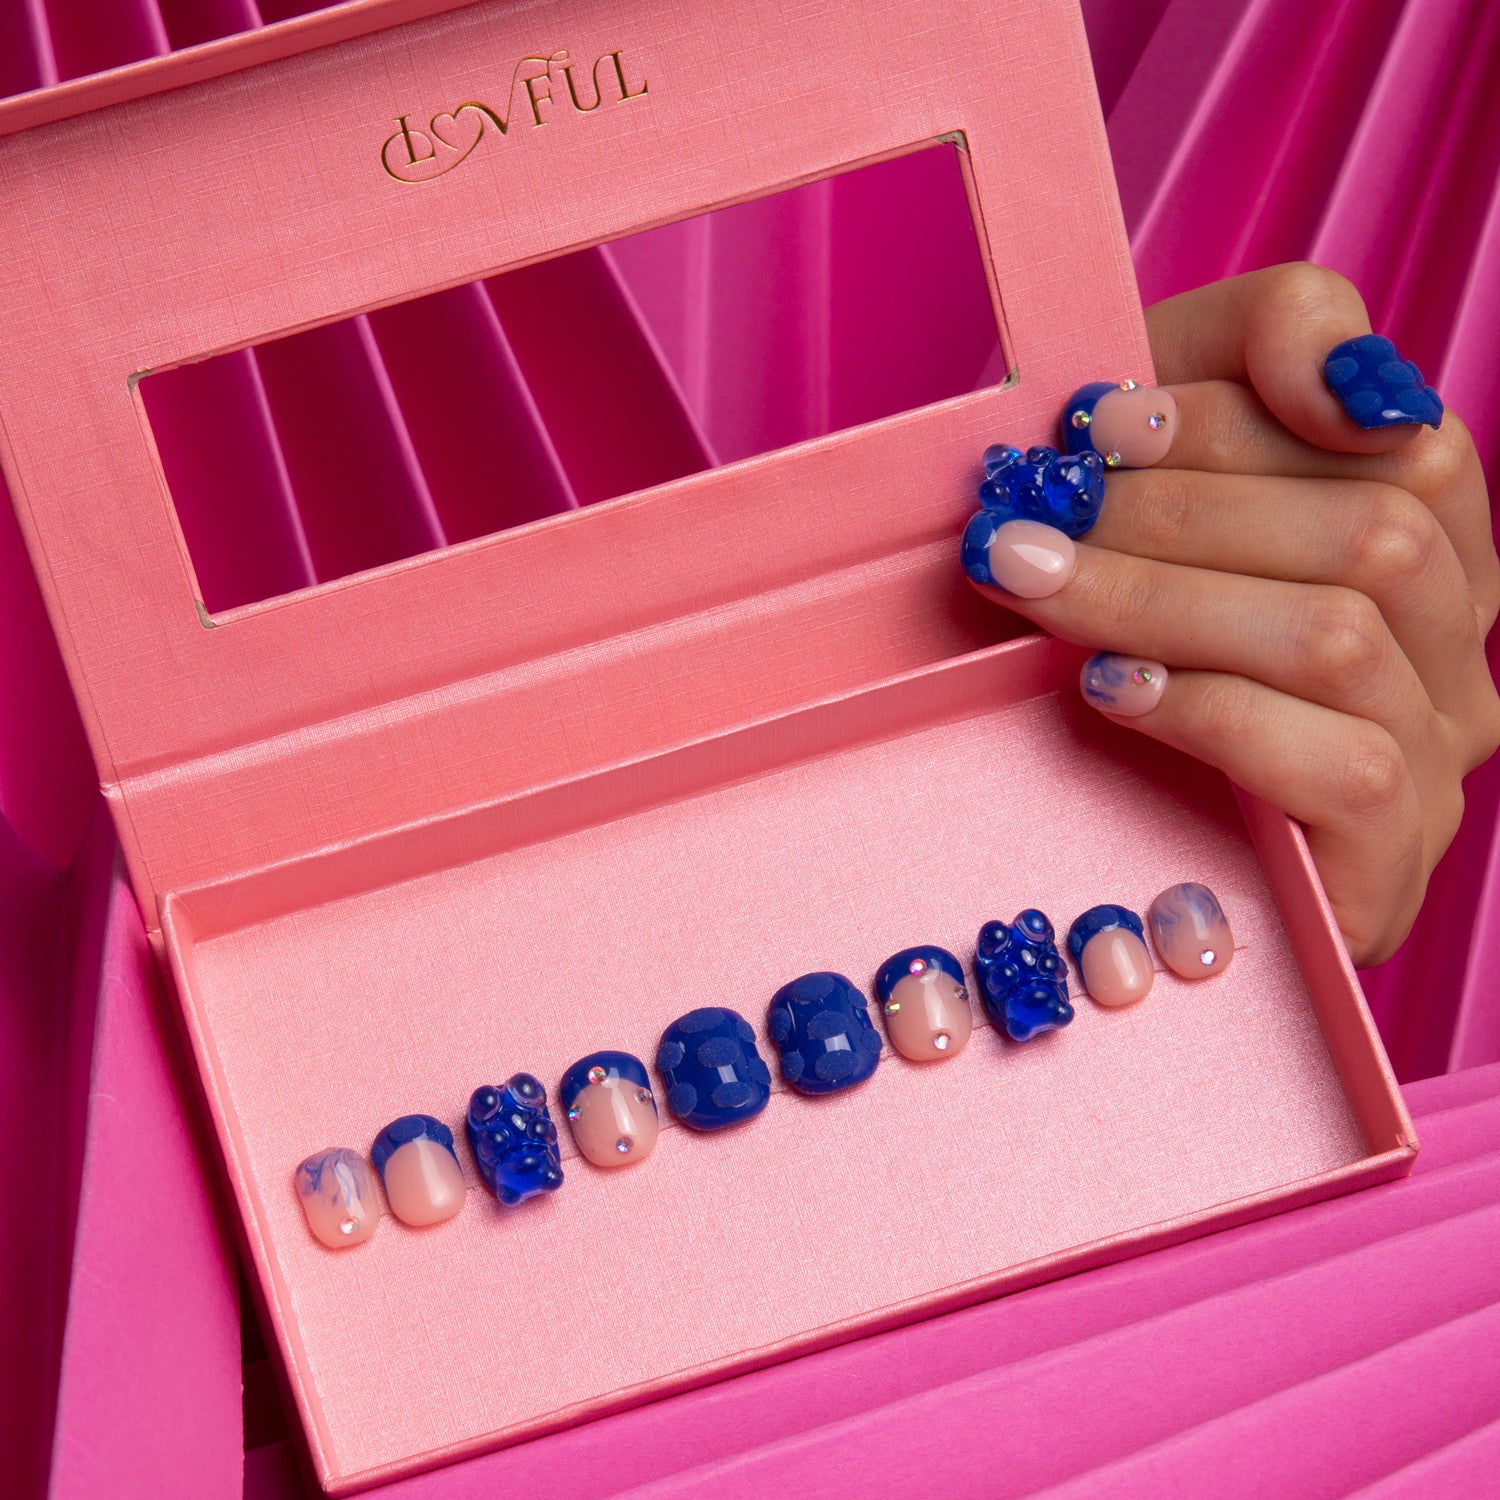 Set of Little Blue Bear press-on square nails in pink box, featuring blue hue with rhinestones, gummy bears, and 3D dots. Hand showing decorated nails.